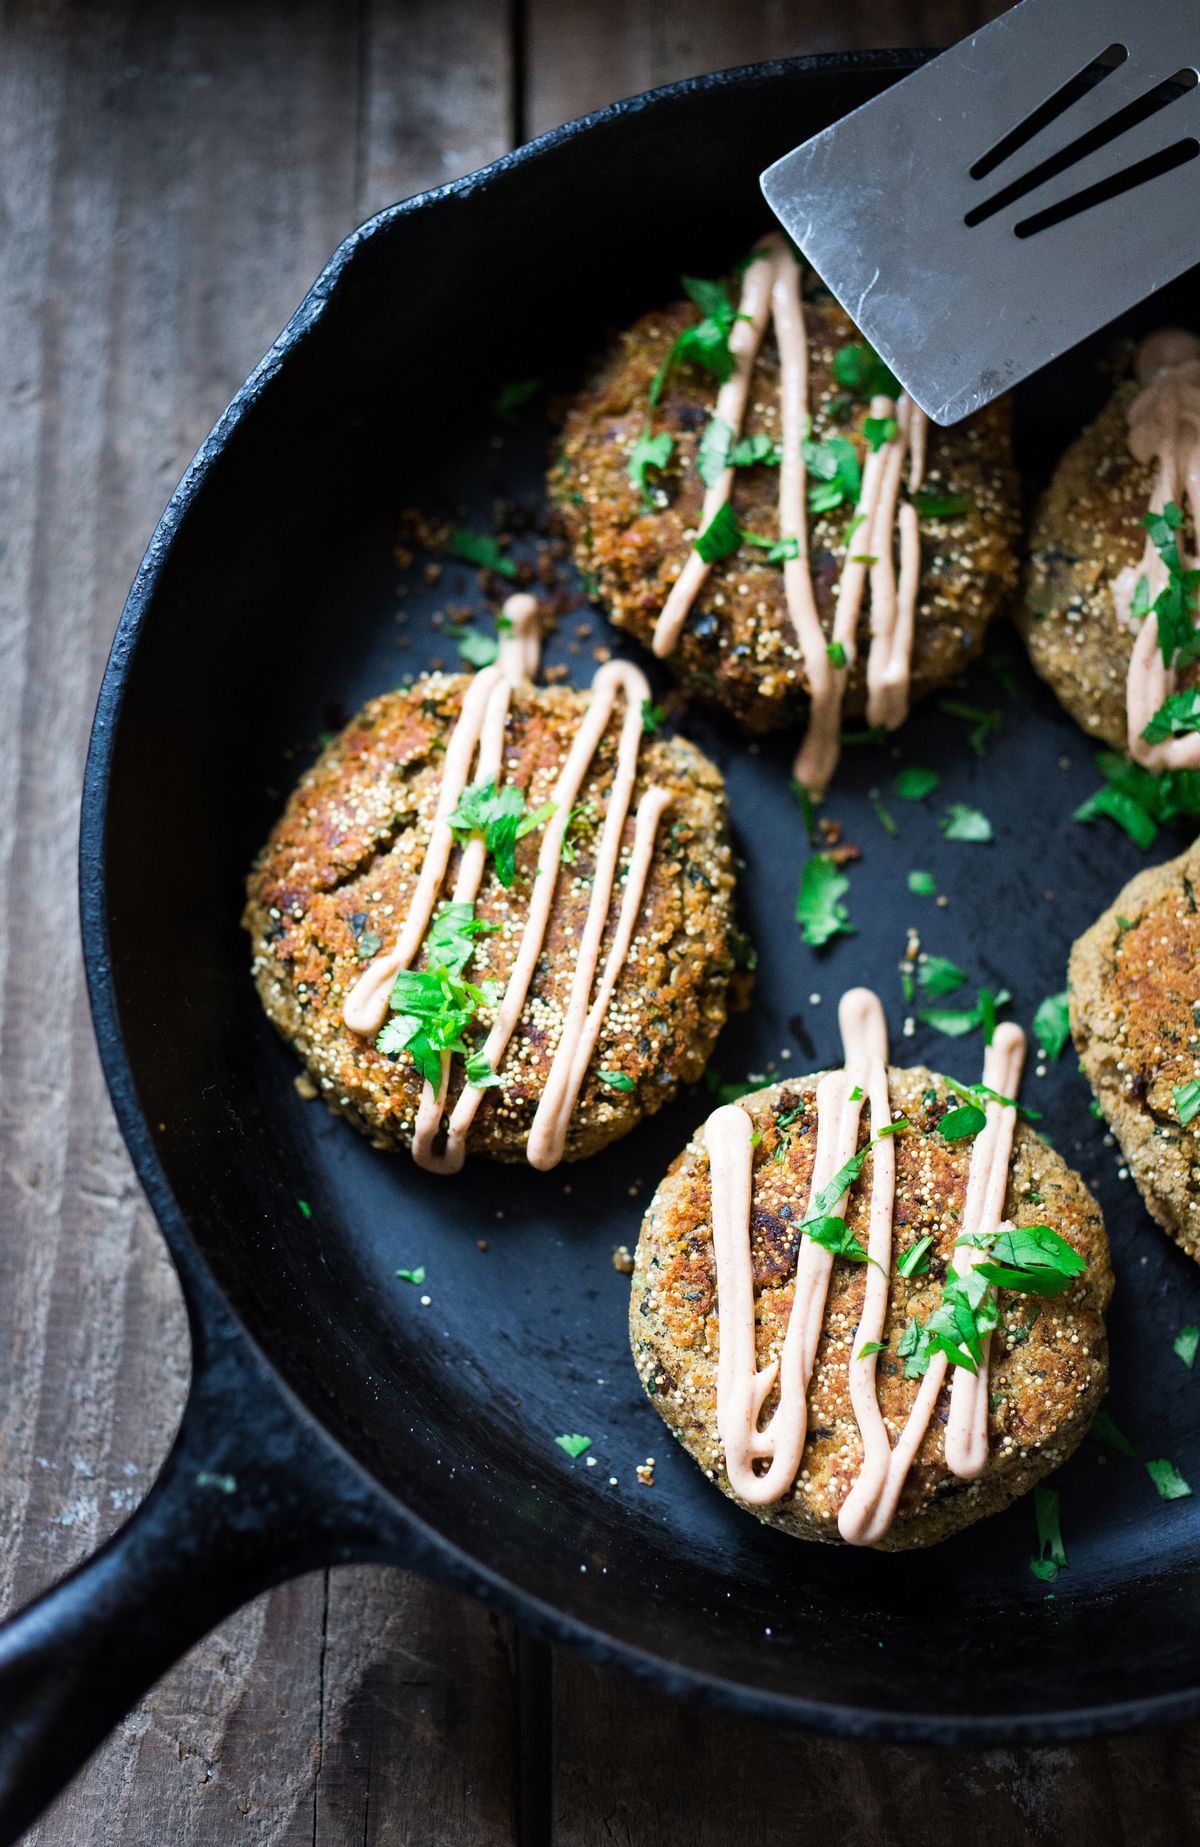 Find the recipe for Southwest amaranth and lentil patties with vegan chipotle “aioli” on Page C5. (Photo by Sylvia Fountaine)